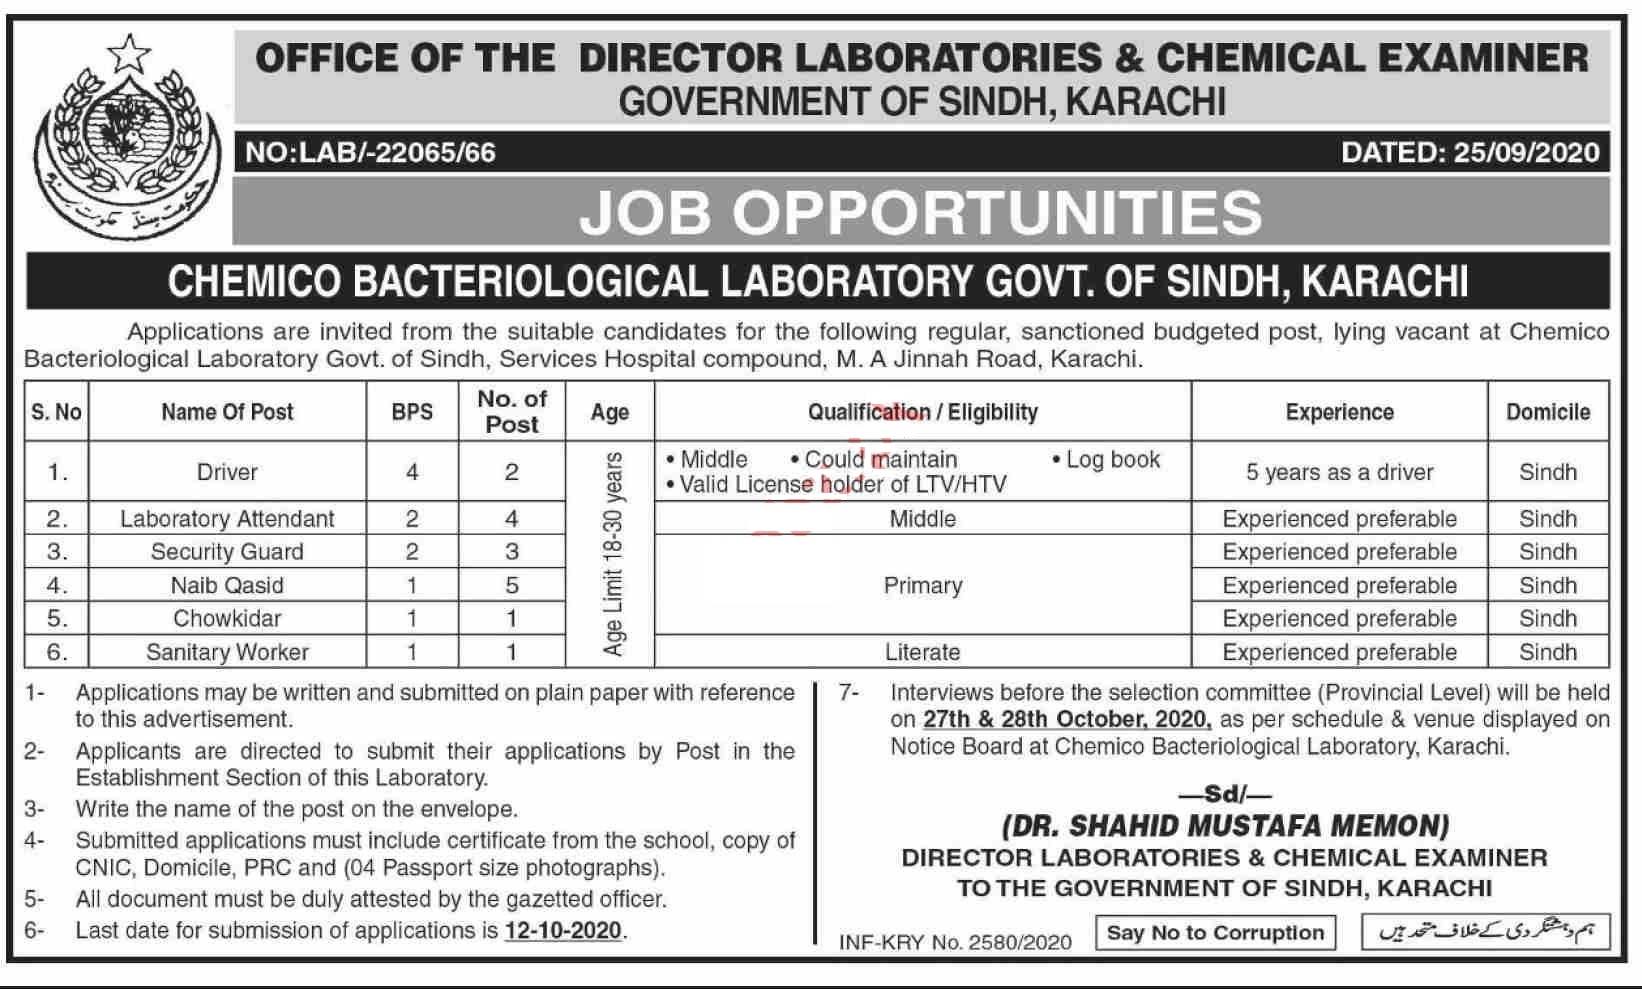 Jobs in Karachi Director Laboratories and Chemical Examiner